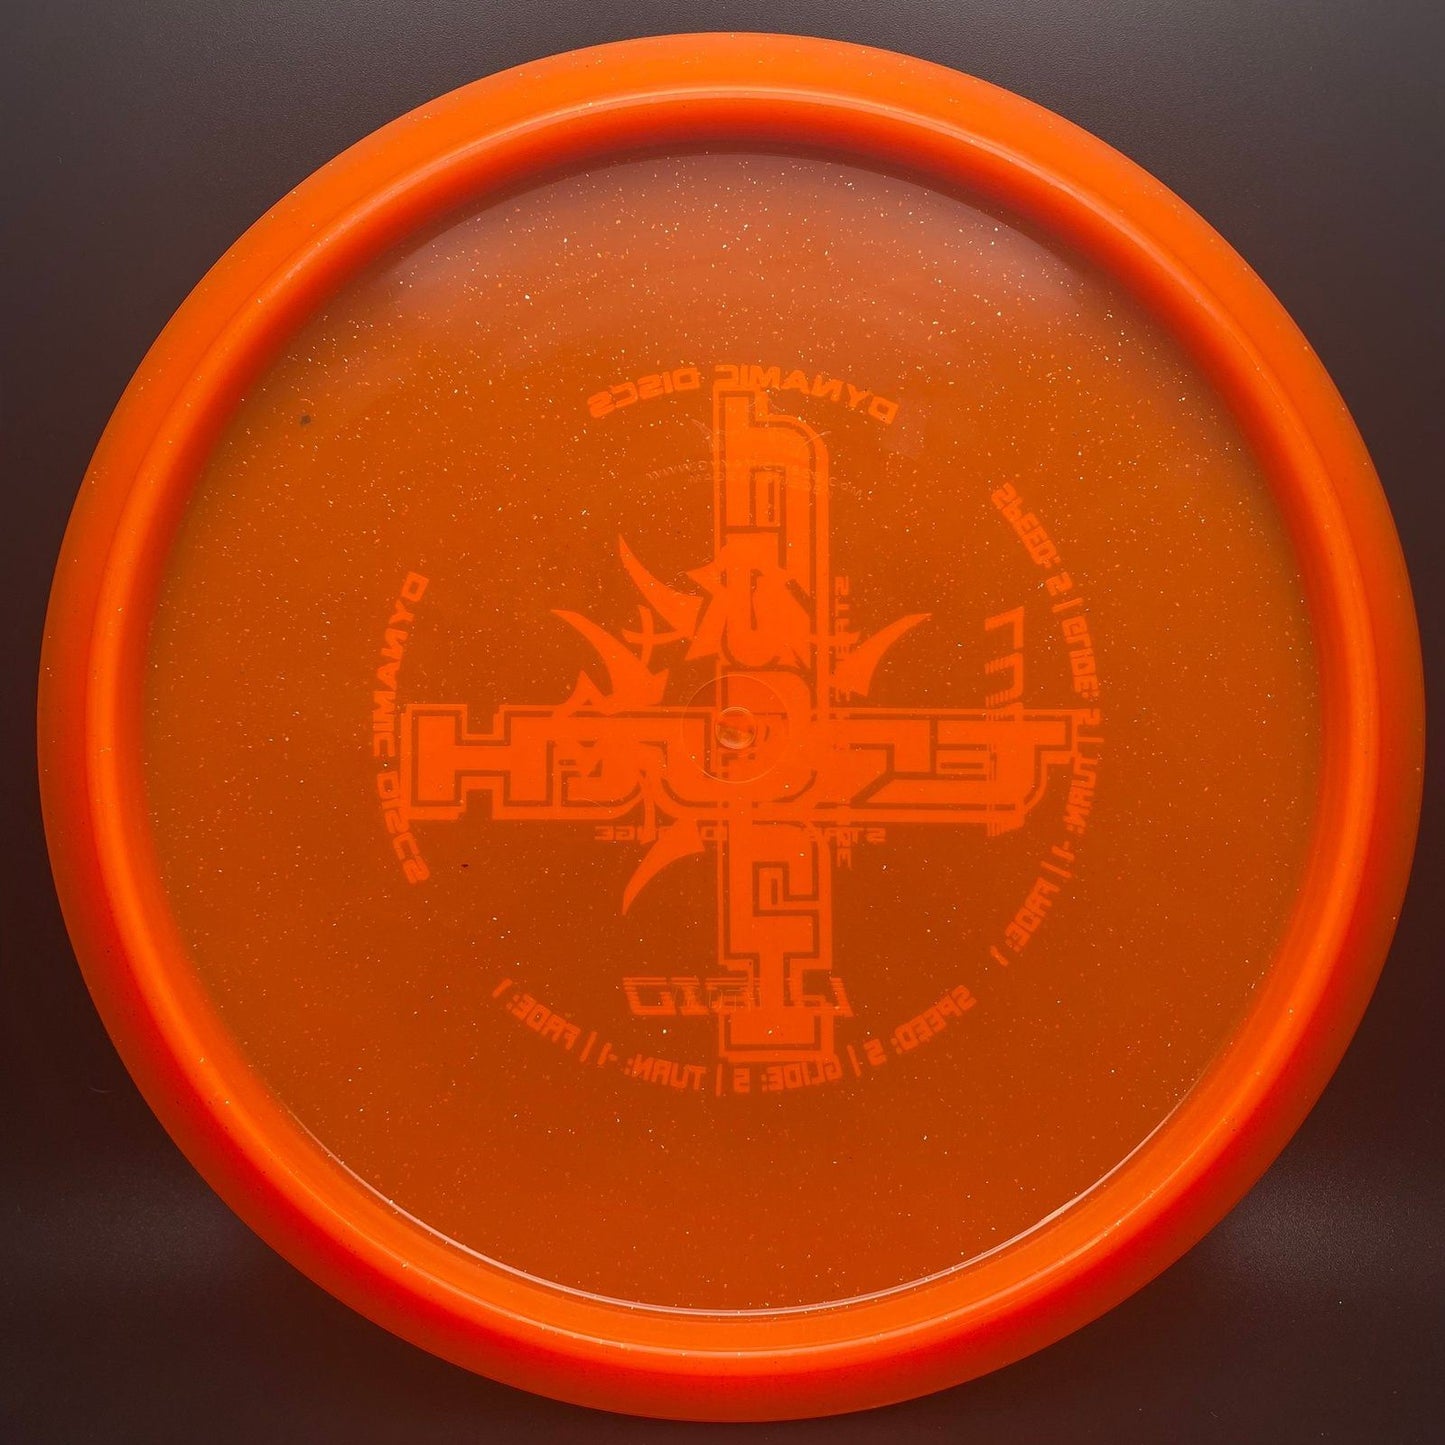 Lucid Truth - X-Out Dynamic Discs